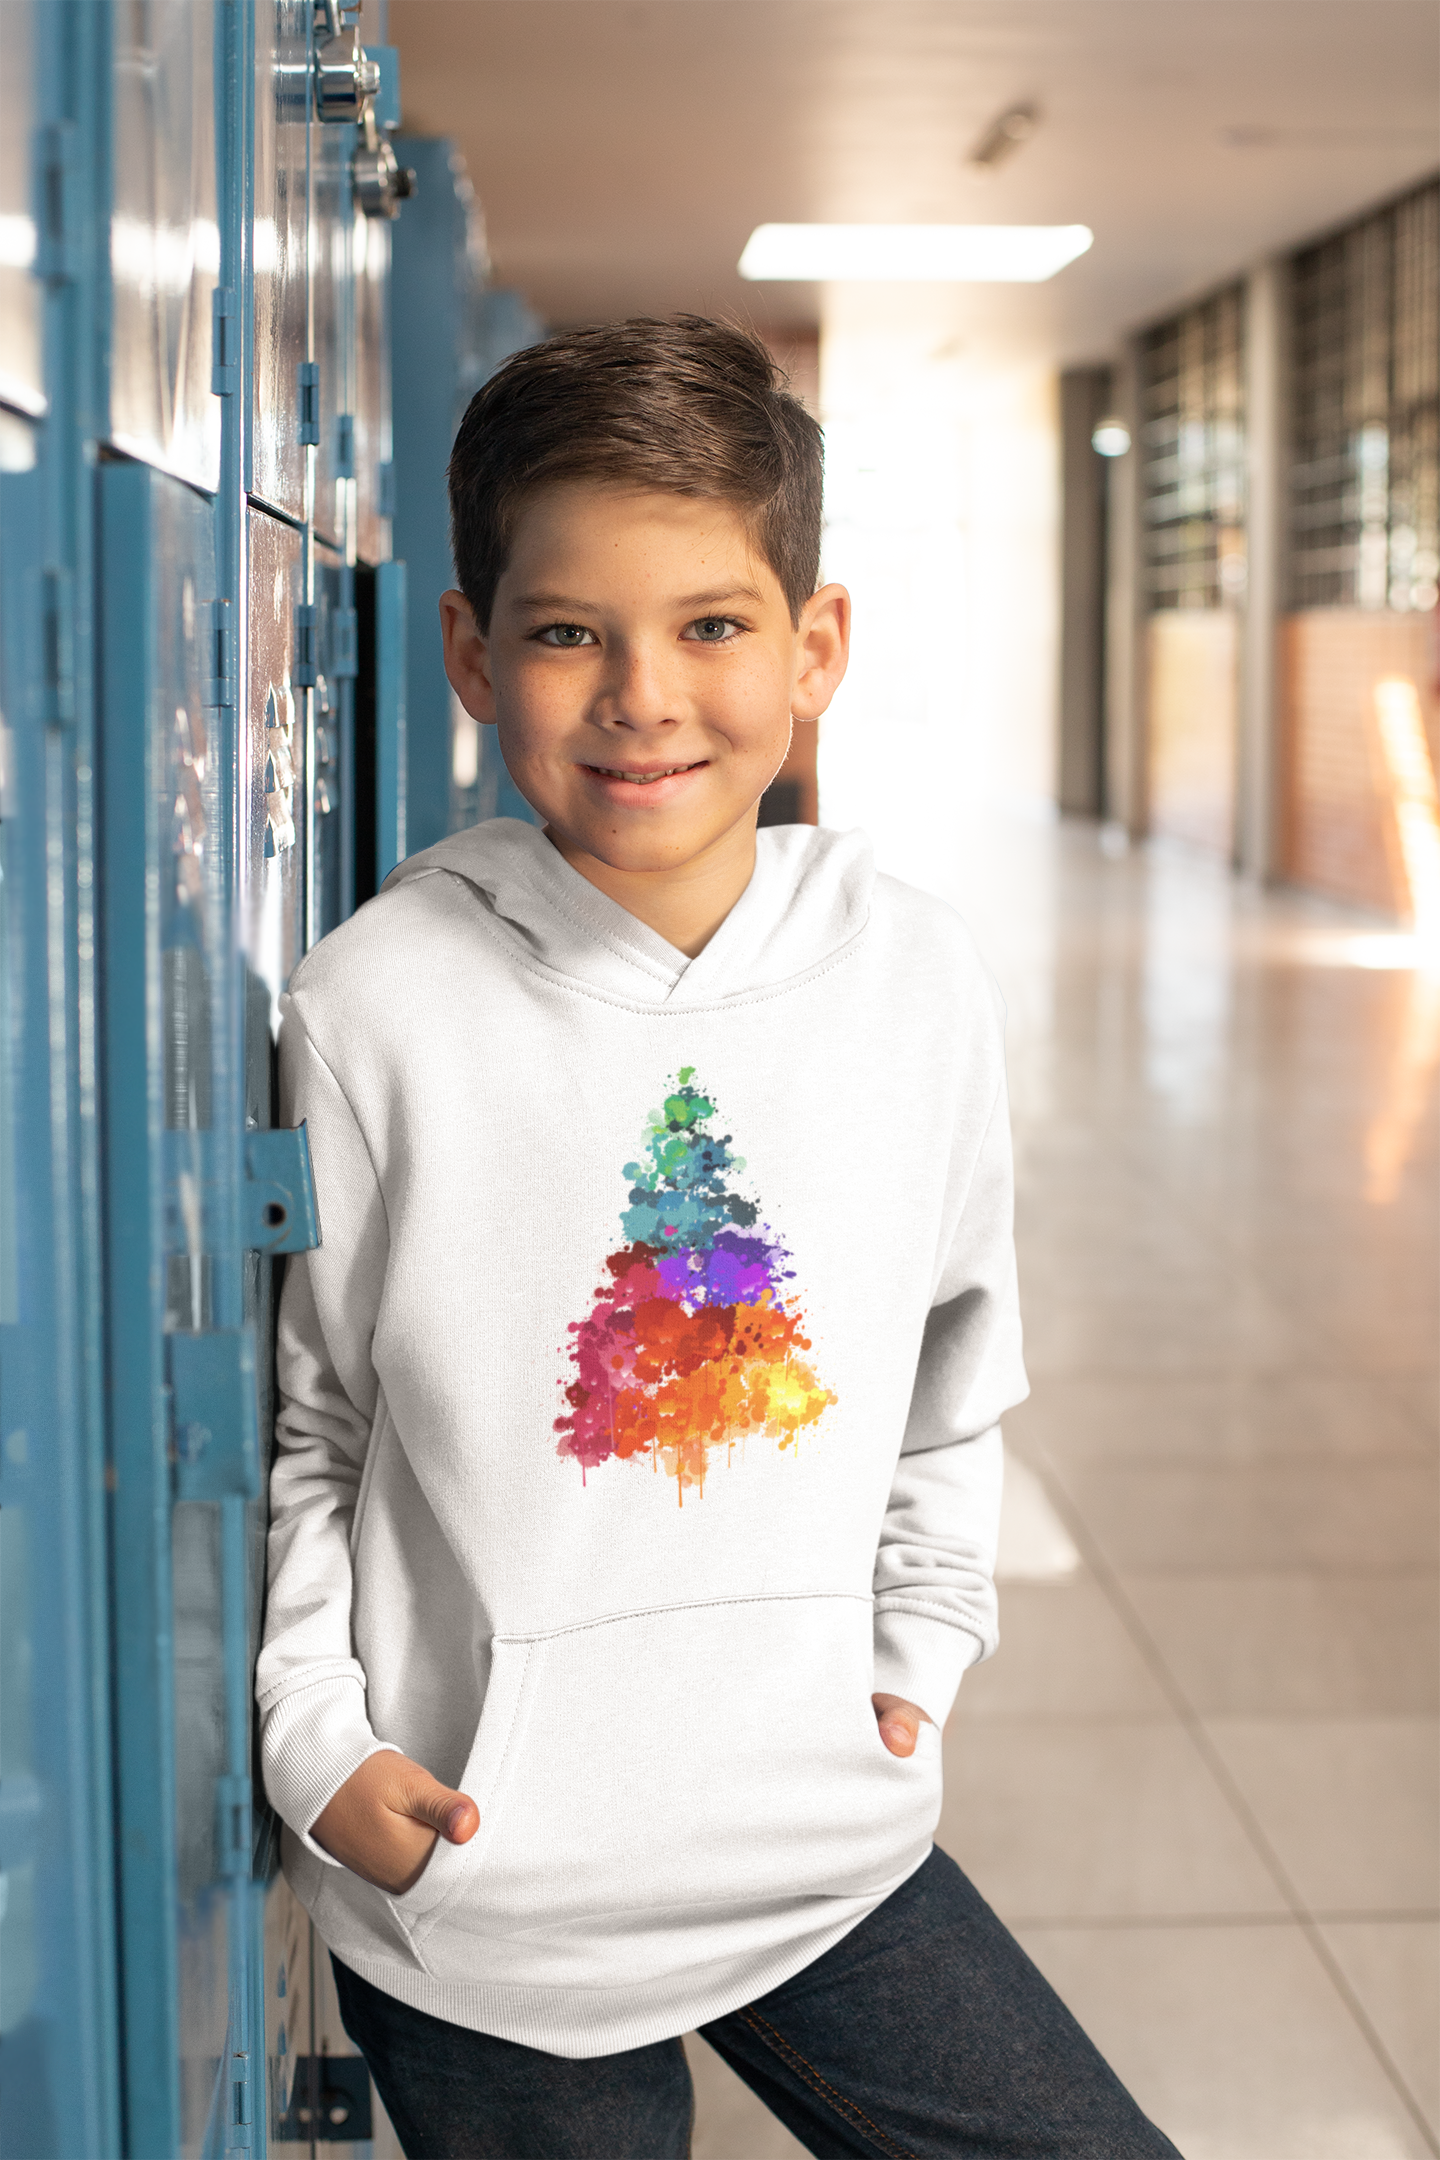 Christmas Tree Kids Hoodie from Vluxe by Lucky Nahum